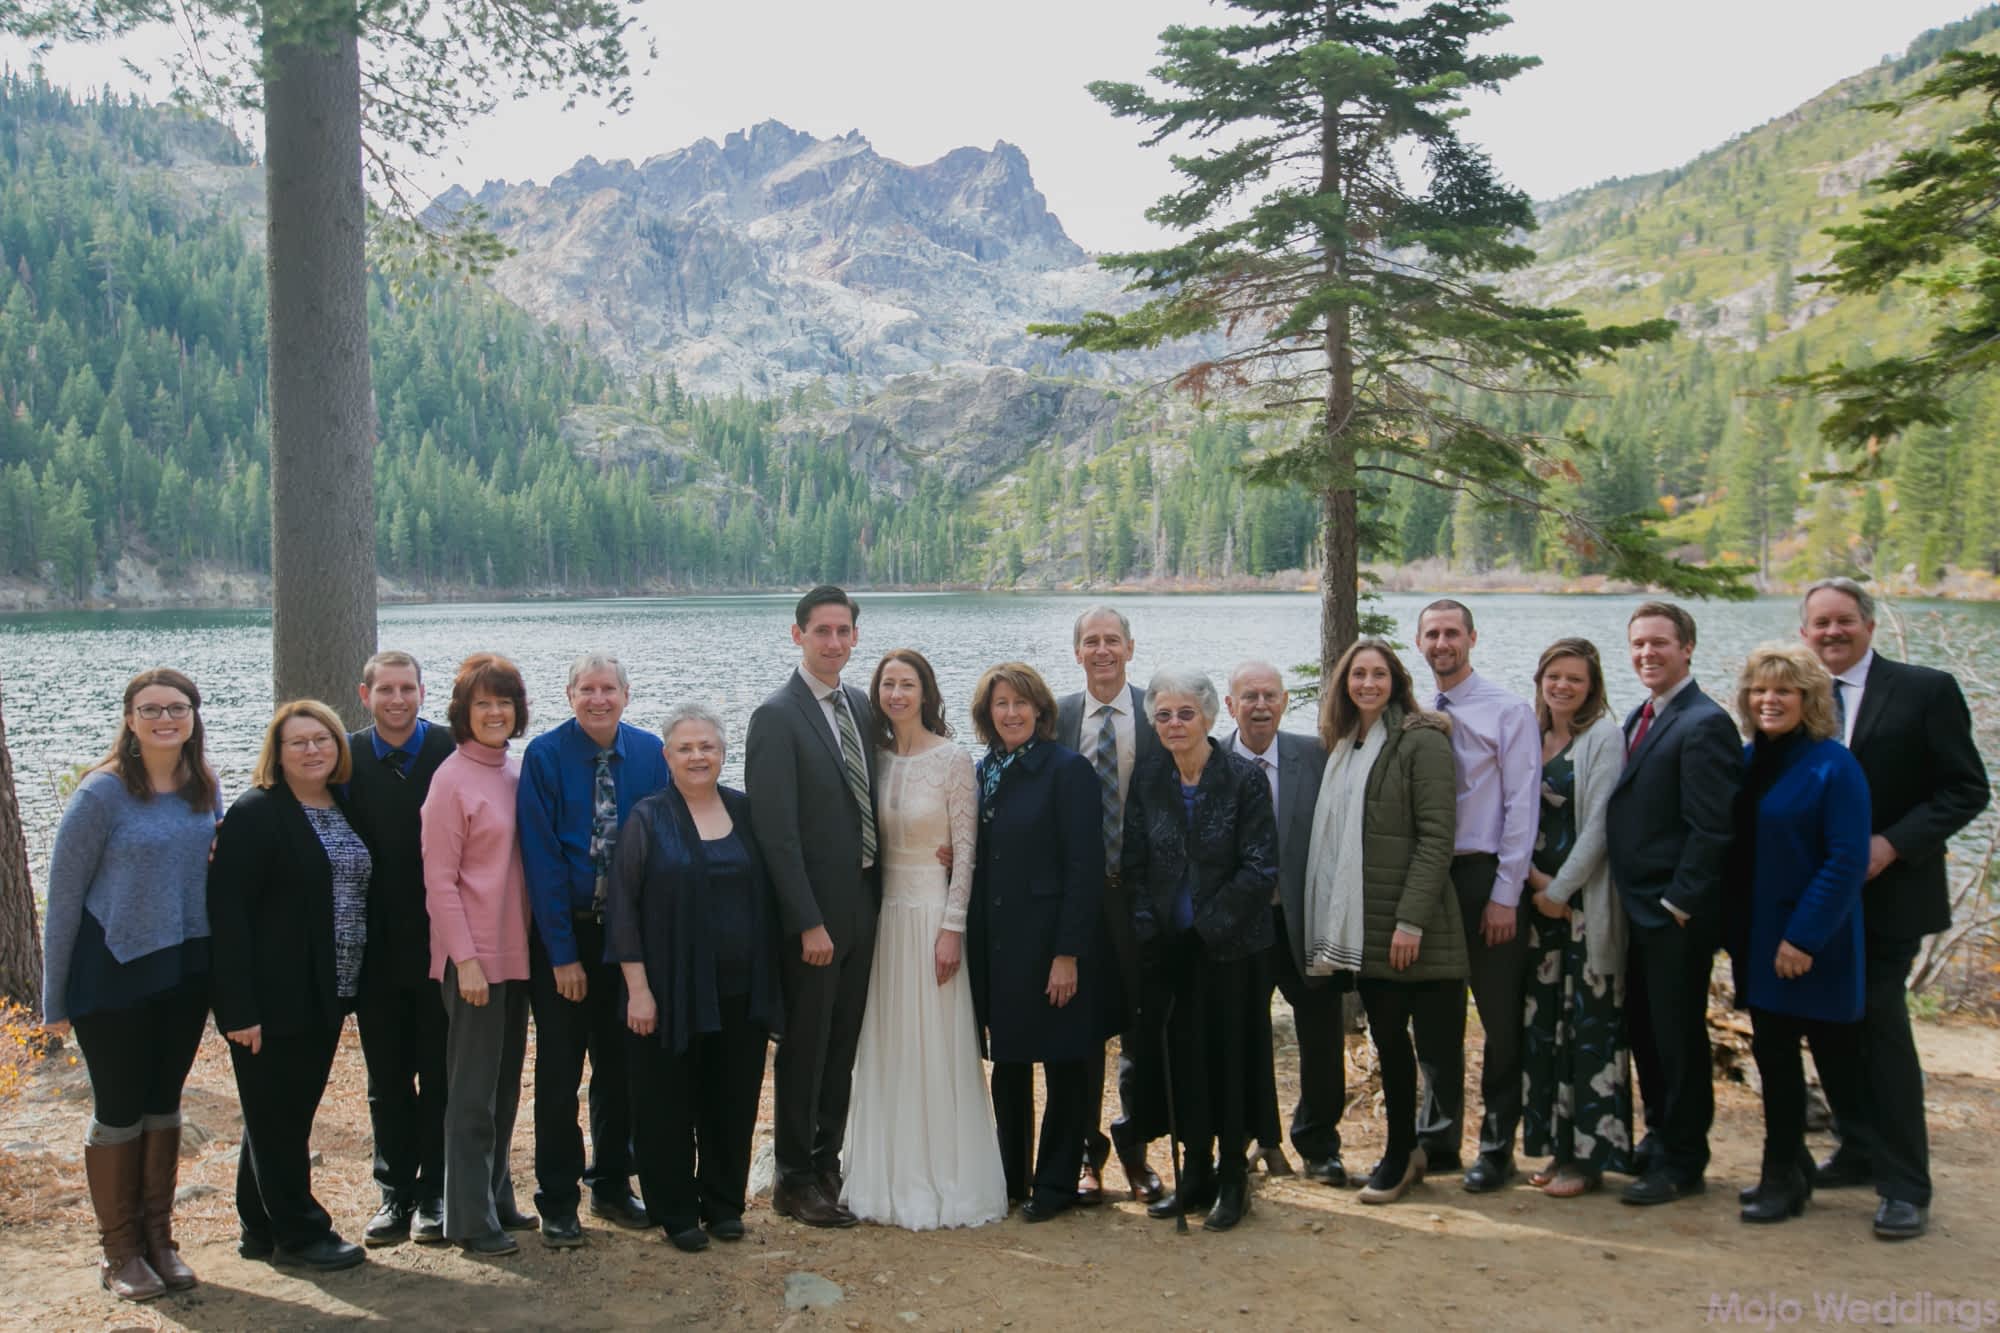 A portrait of the bride and groom and all their guests in front of the lake and mountains.